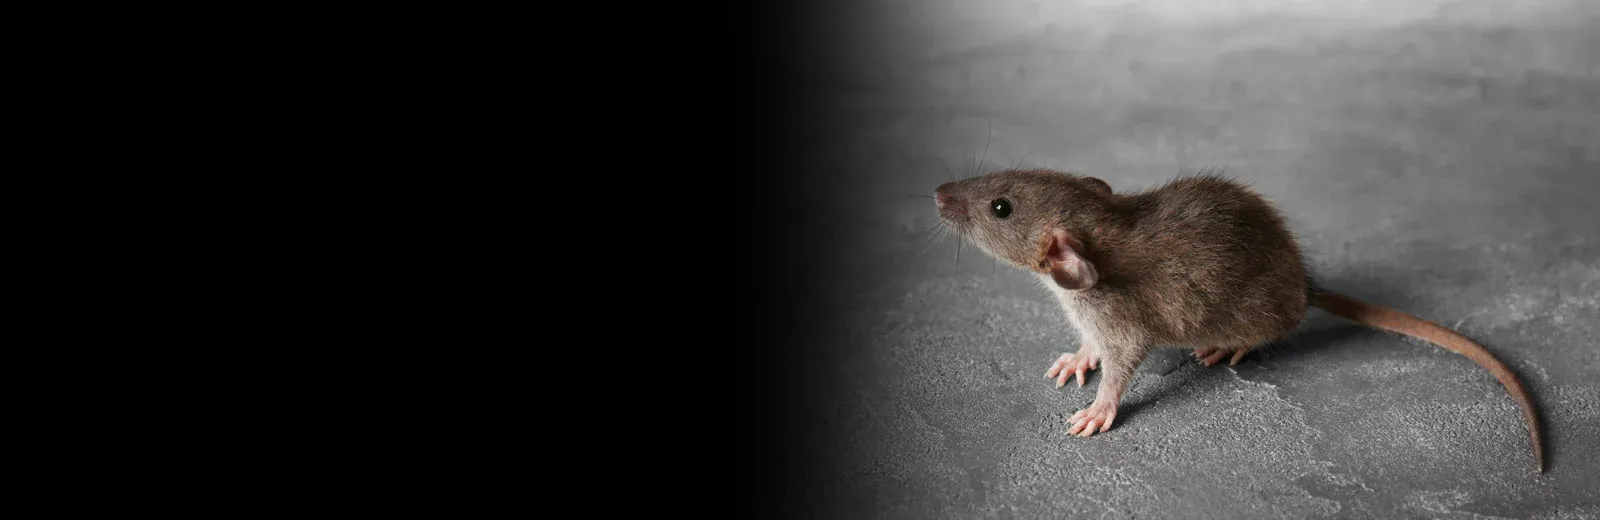 Mouse in a house - rodent control